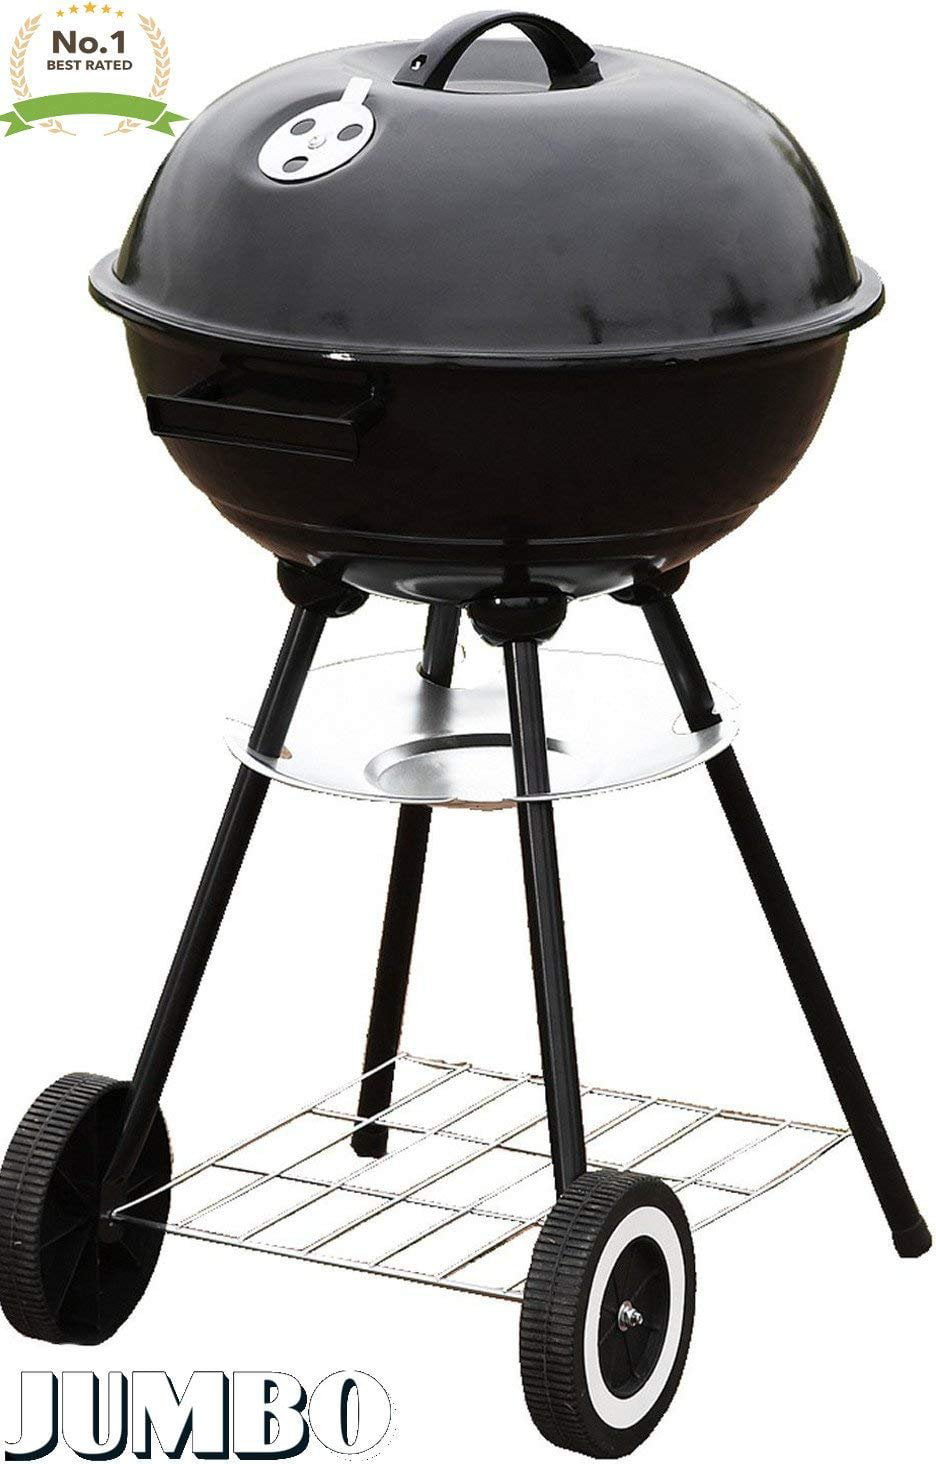 Jumbo Original Kettle Charcoal Outdoor Portable BBQ Grill Cooking Stainless Steel Standing & Grilling Steaks, Burgers, Backyard Pitmaster & Tailgating - Walmart.com